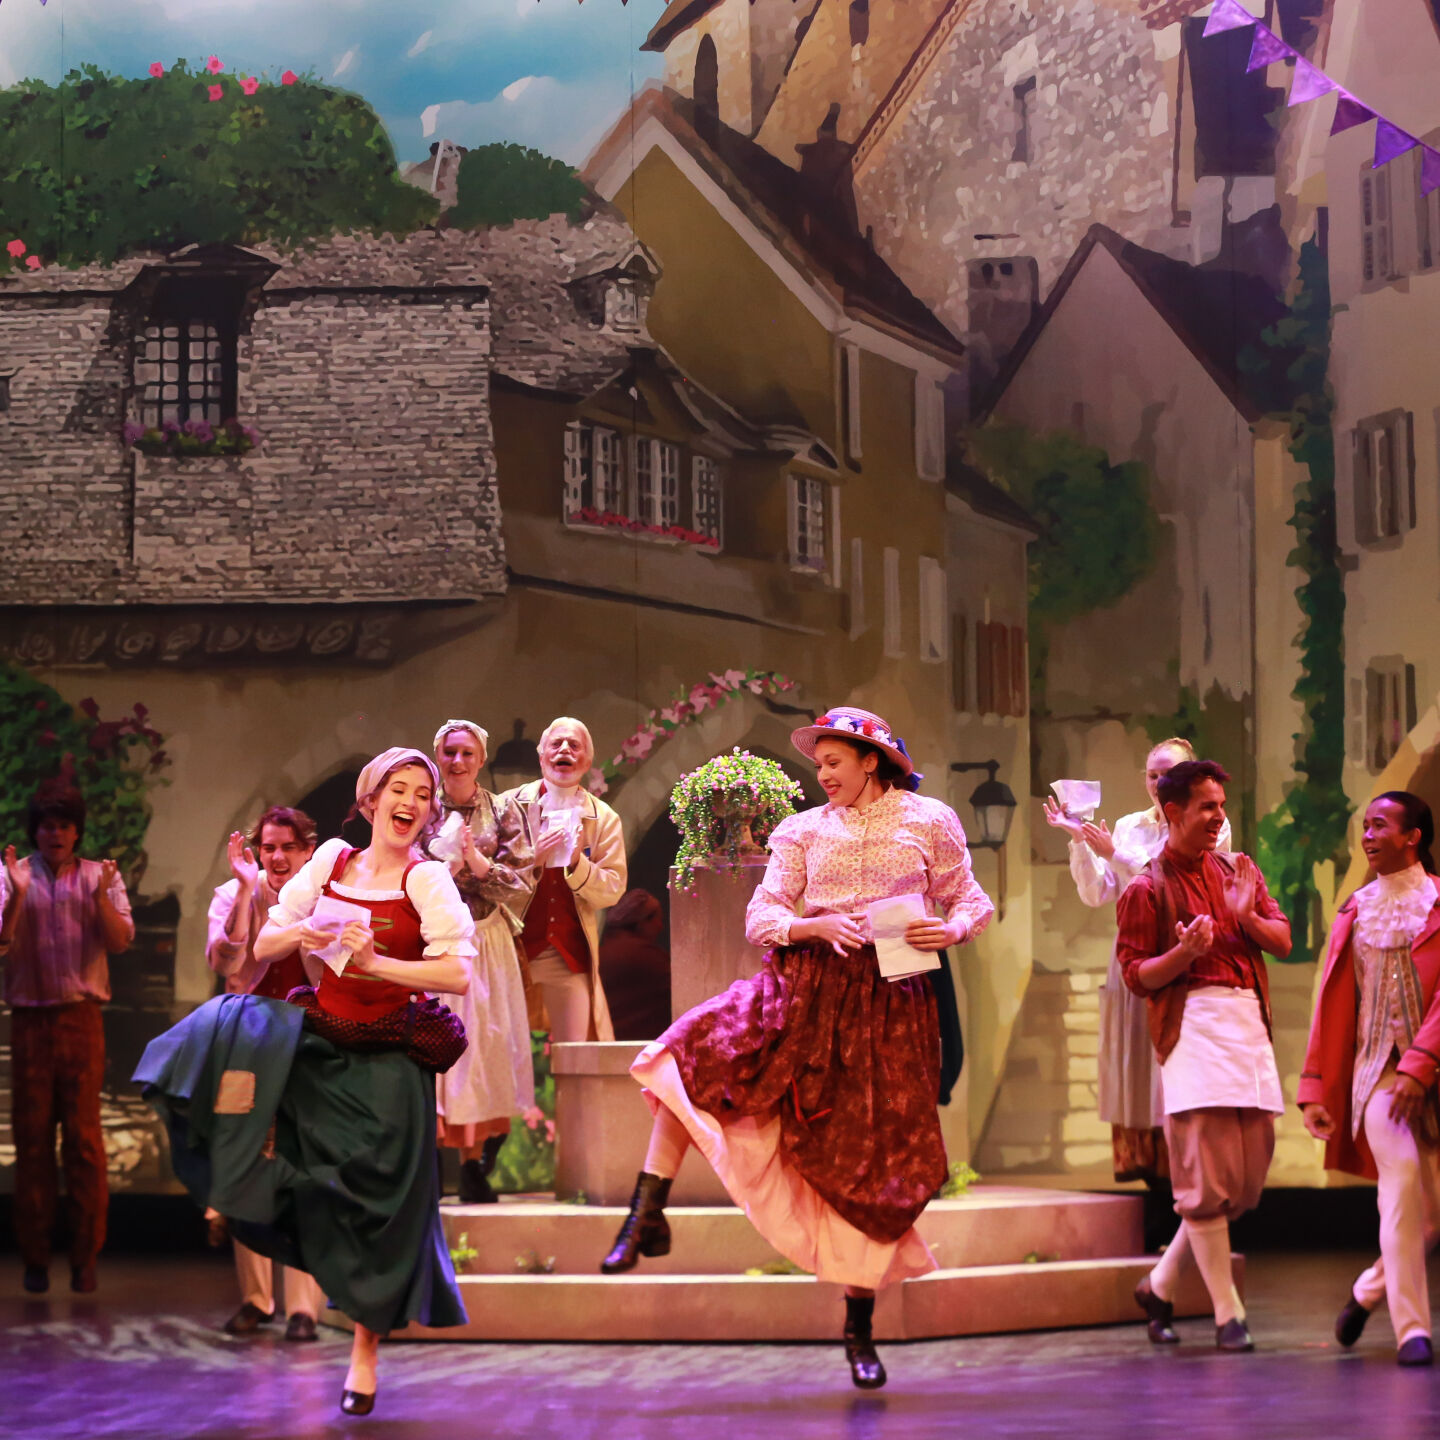 Audiences dazzled as ~curtain closes on Cinderella~